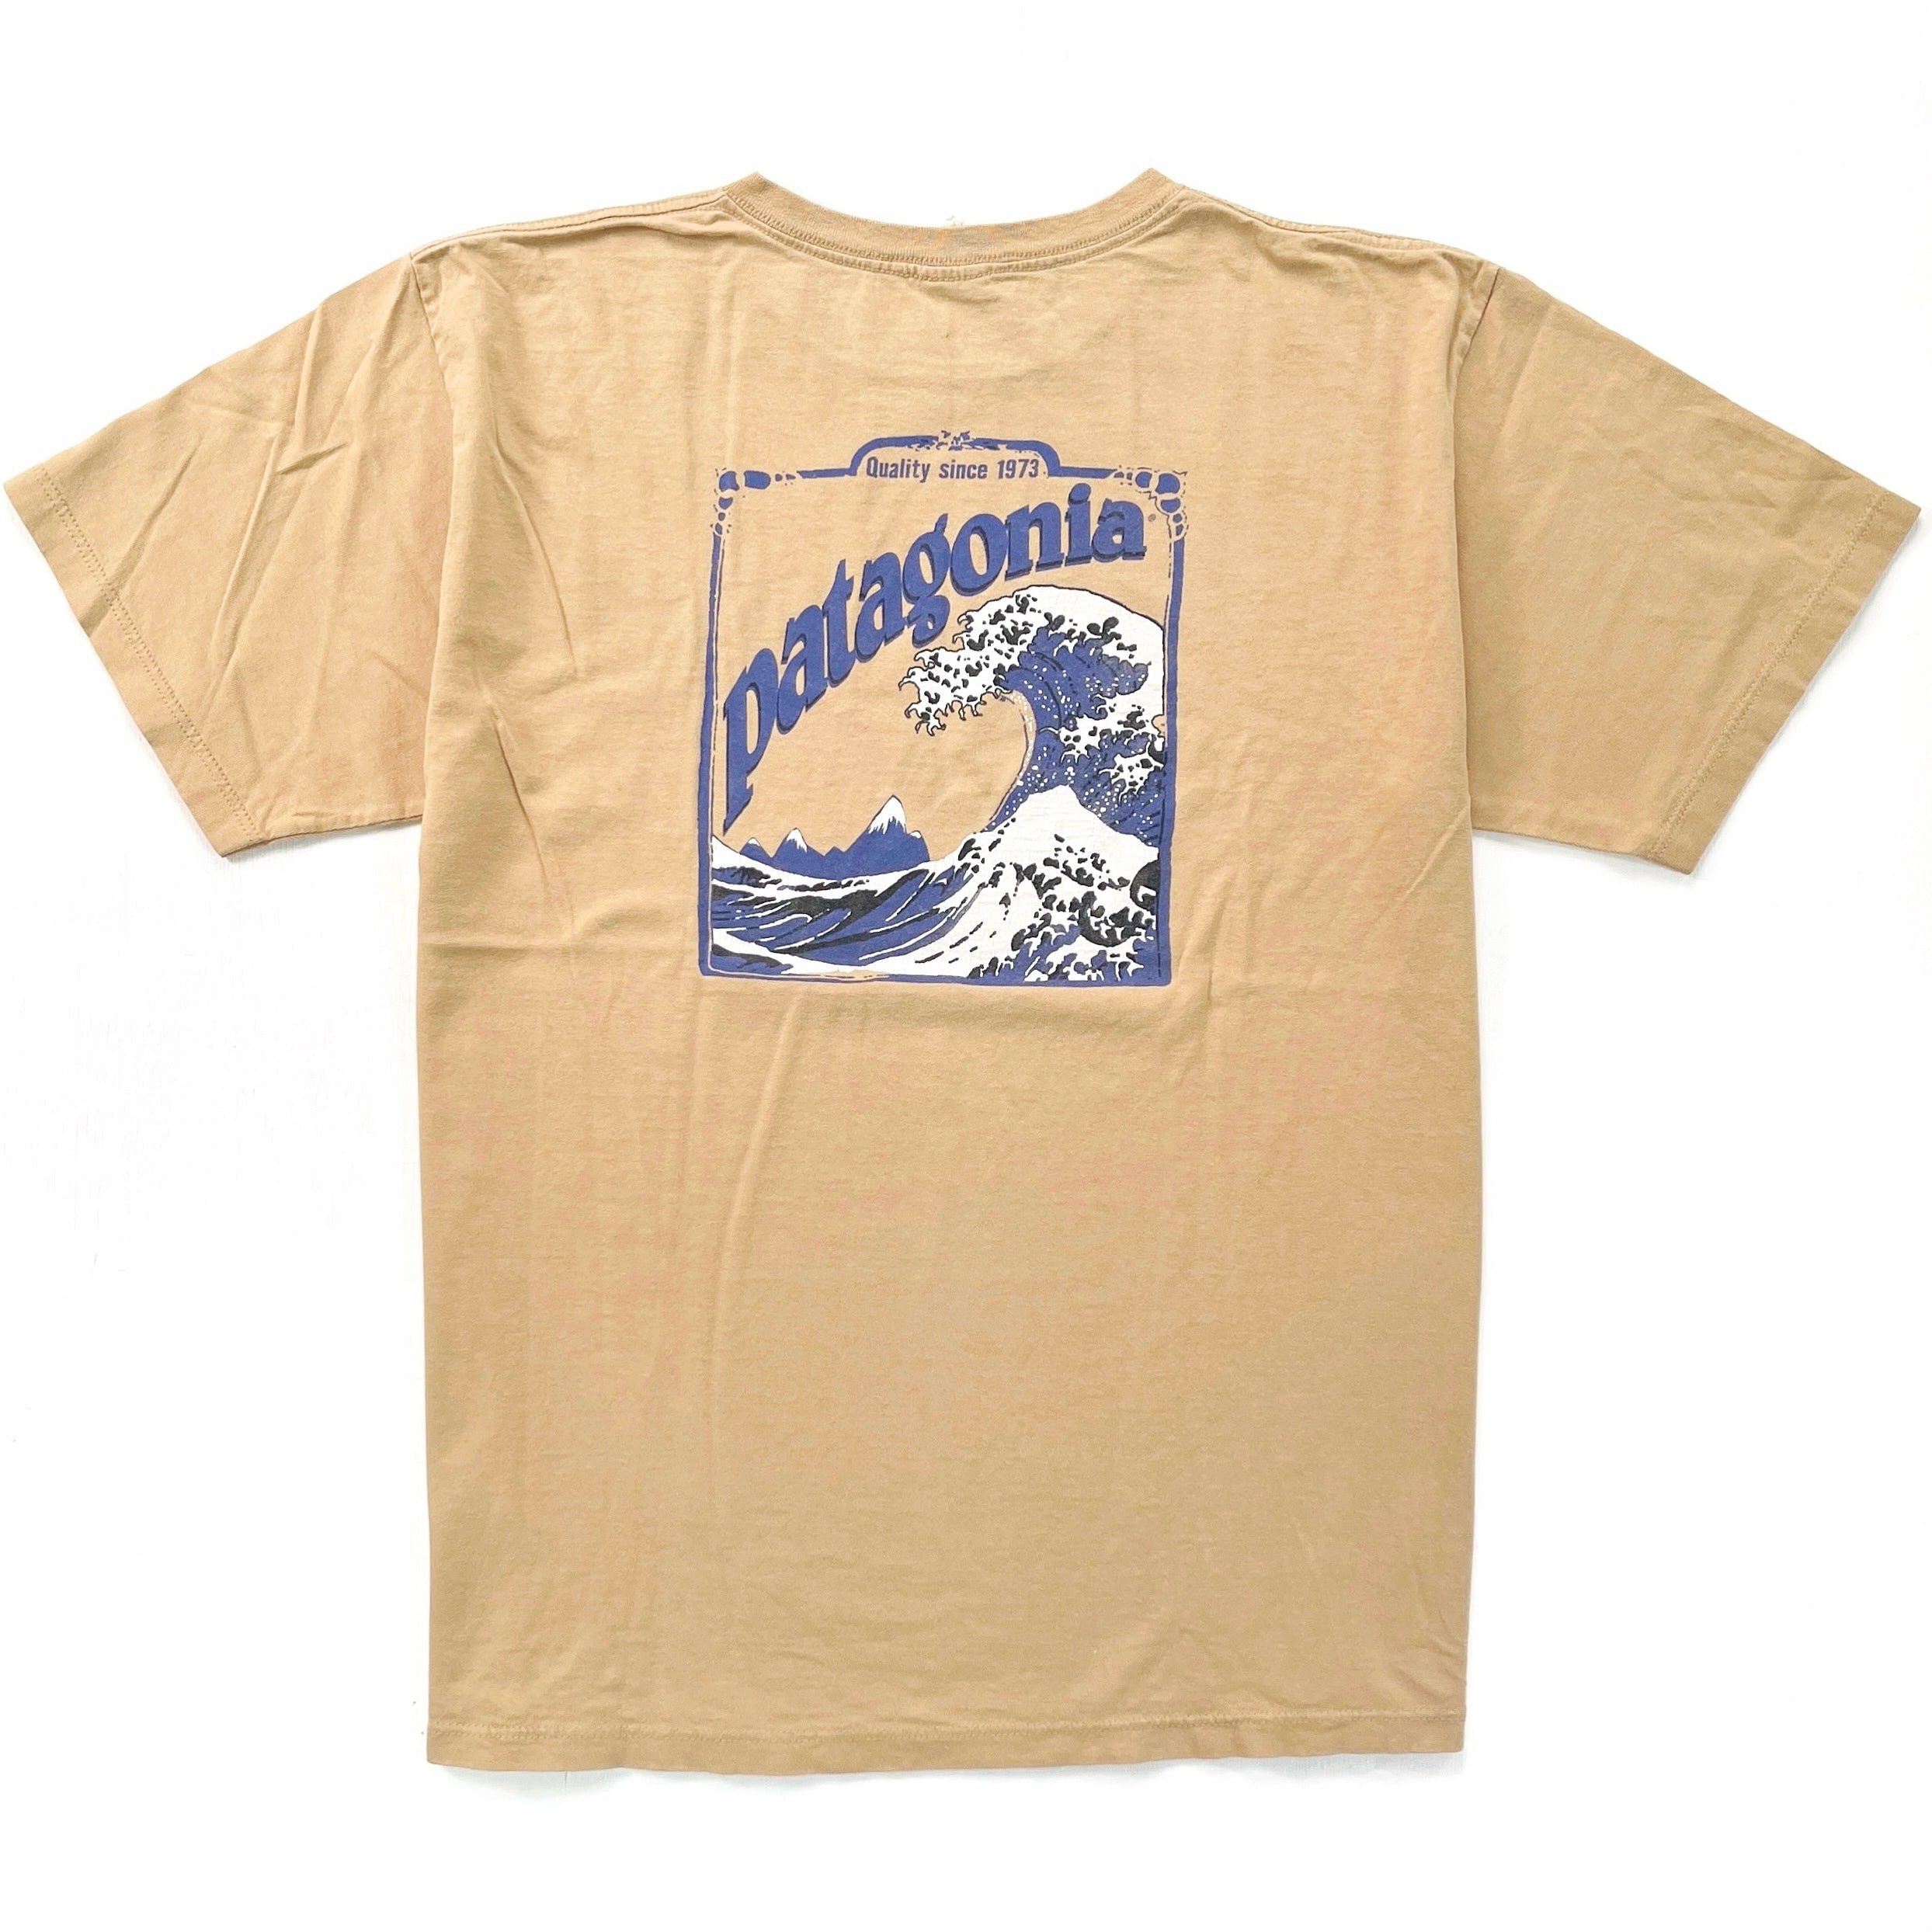 1990s Patagonia Made In The U.S.A. Organic Cotton T-Shirt (M)